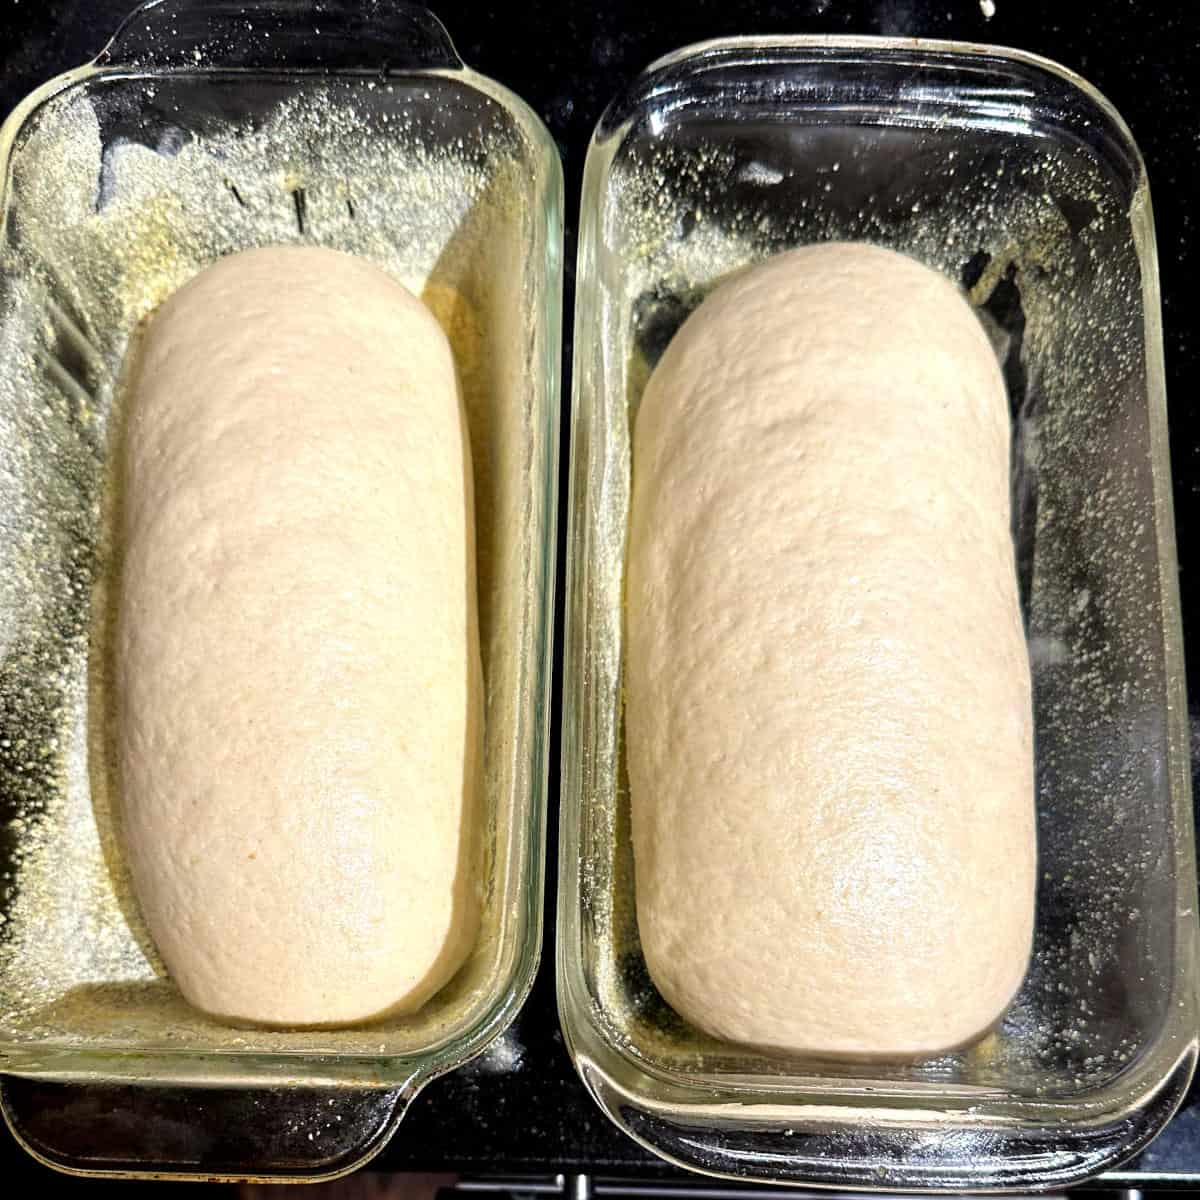 Loaves formed and placed in glass loaf pans coated with cornmeal.